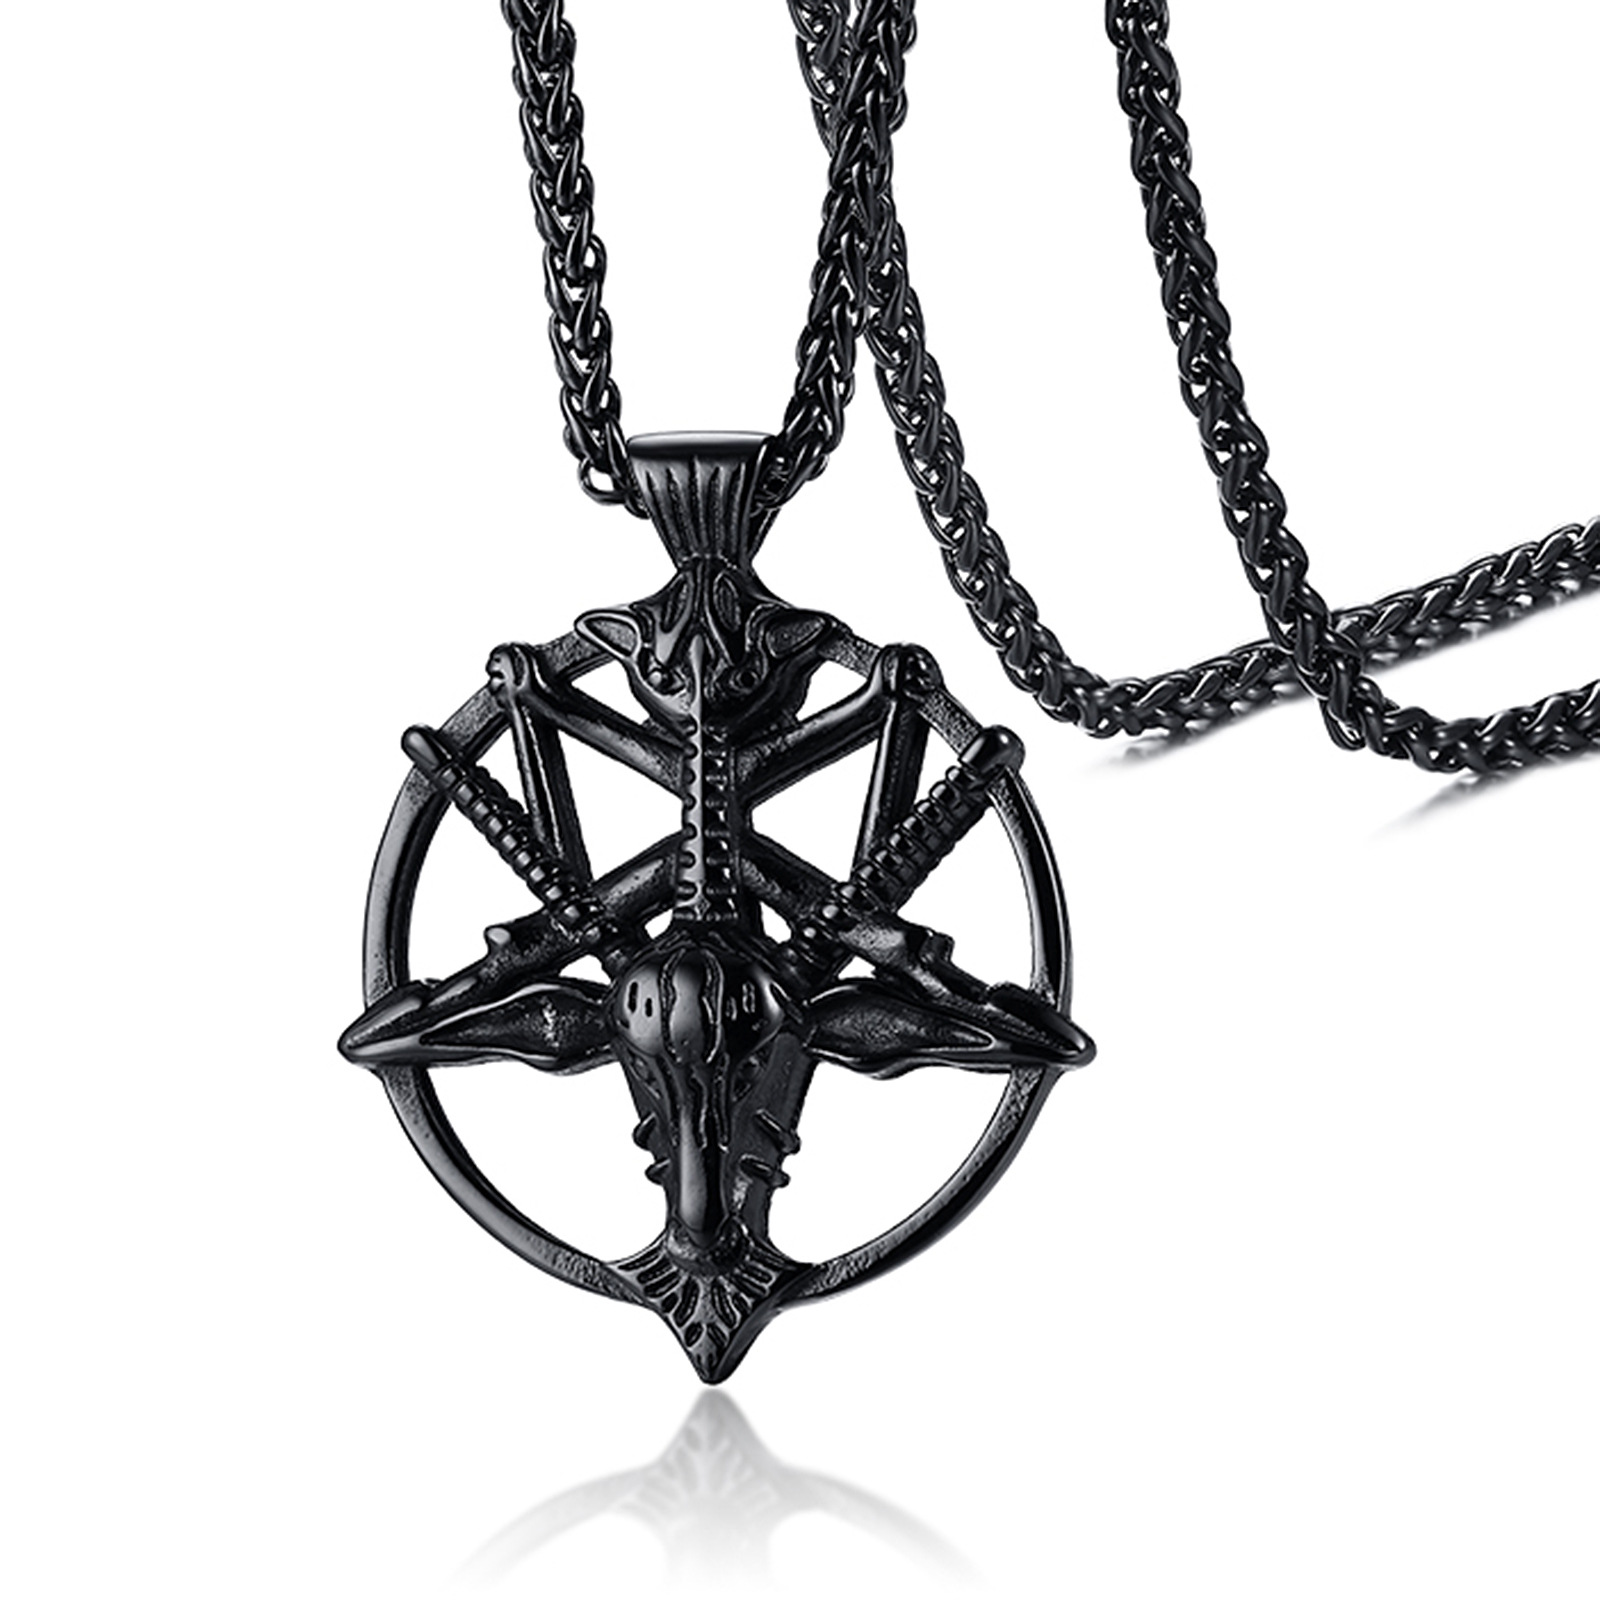 Black pendant with chain